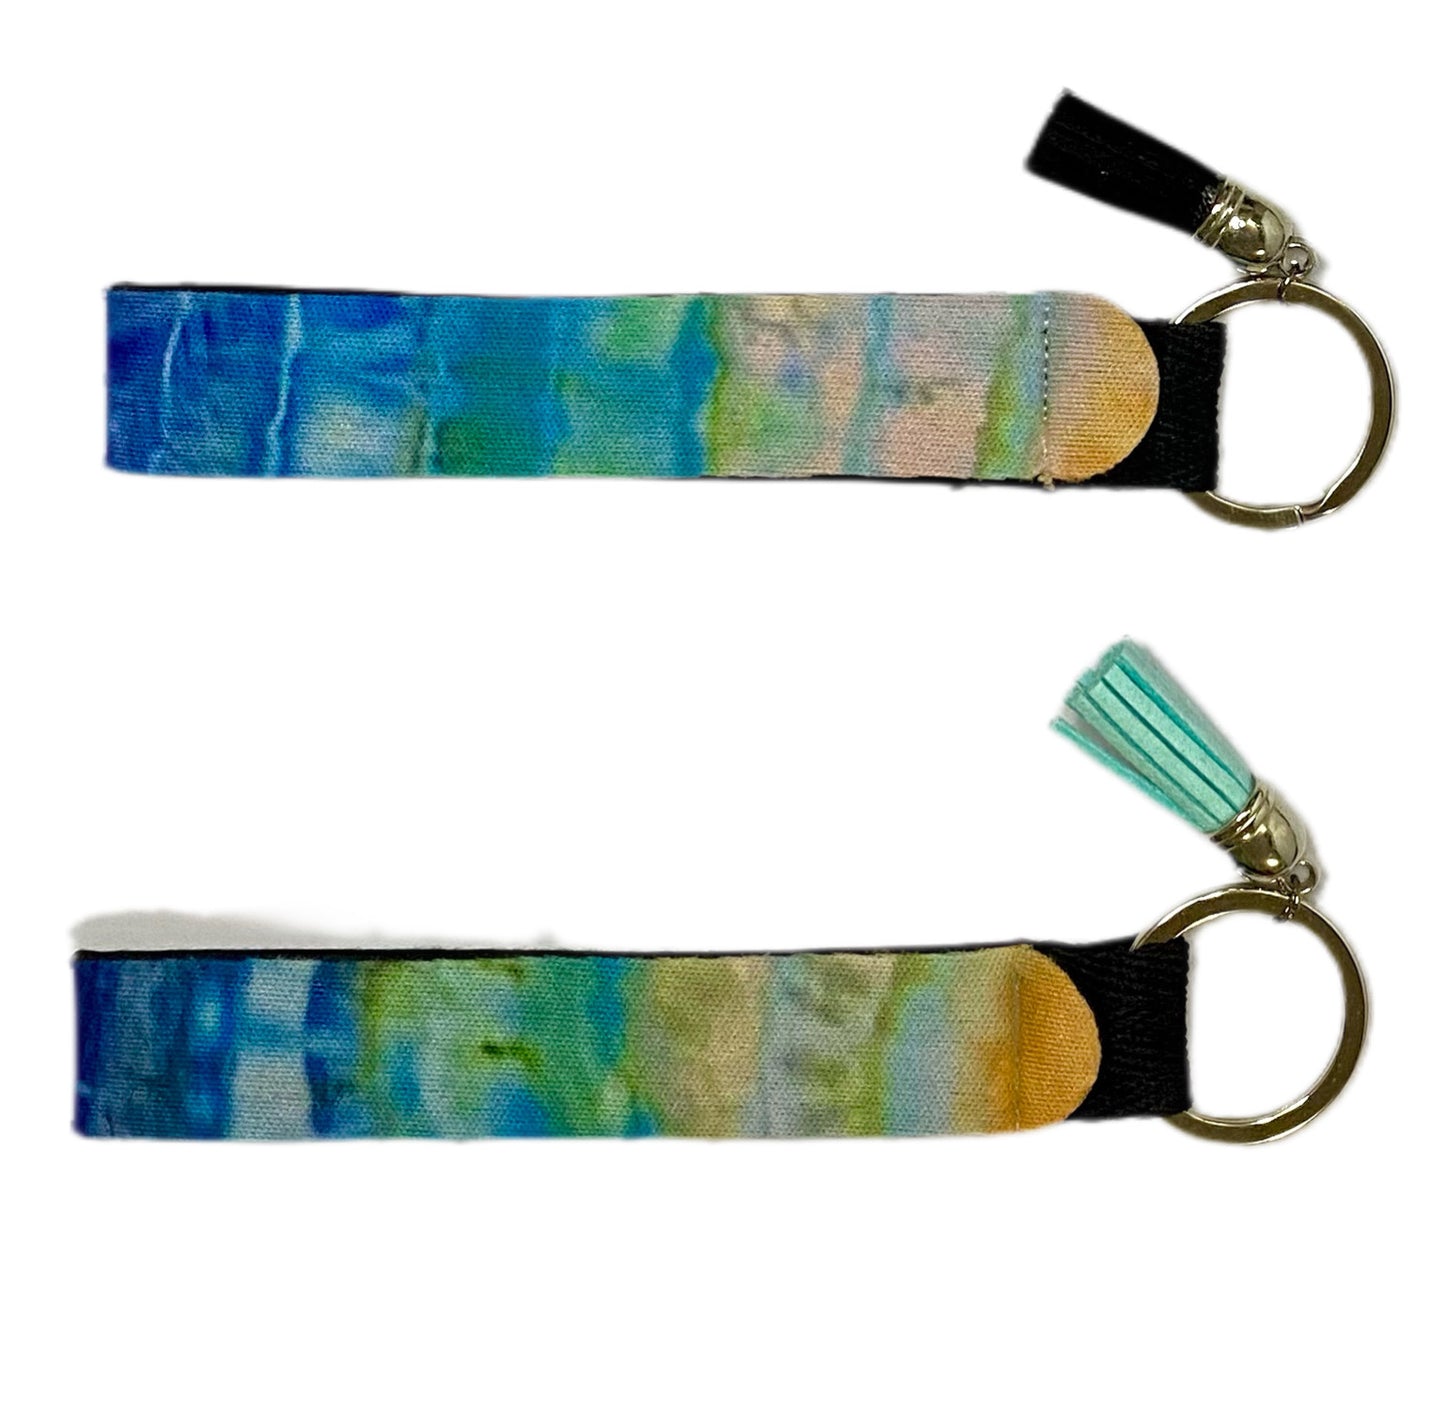 Addy’s Tie Dyed Designs on Wristlets Keychains - your choice